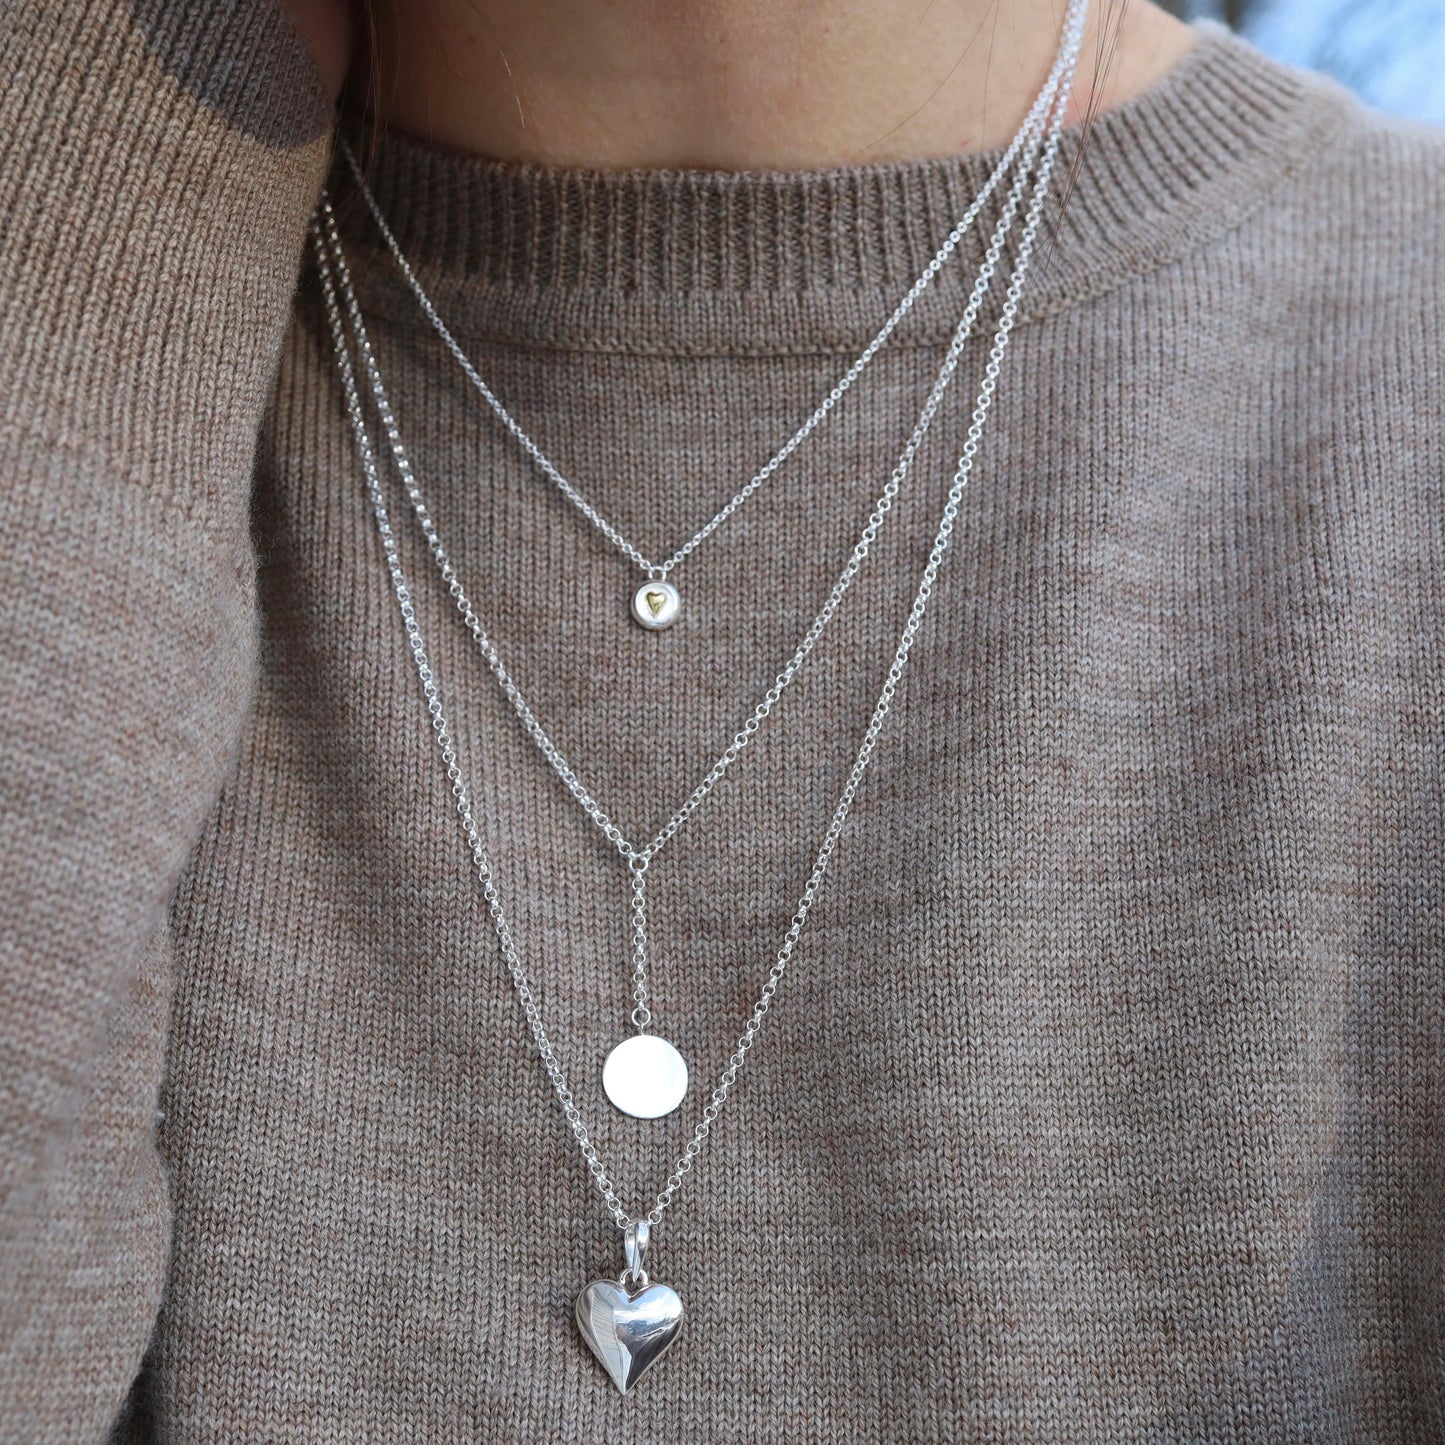 NKL Disc Drop "Y" Necklace in Sterling Silver